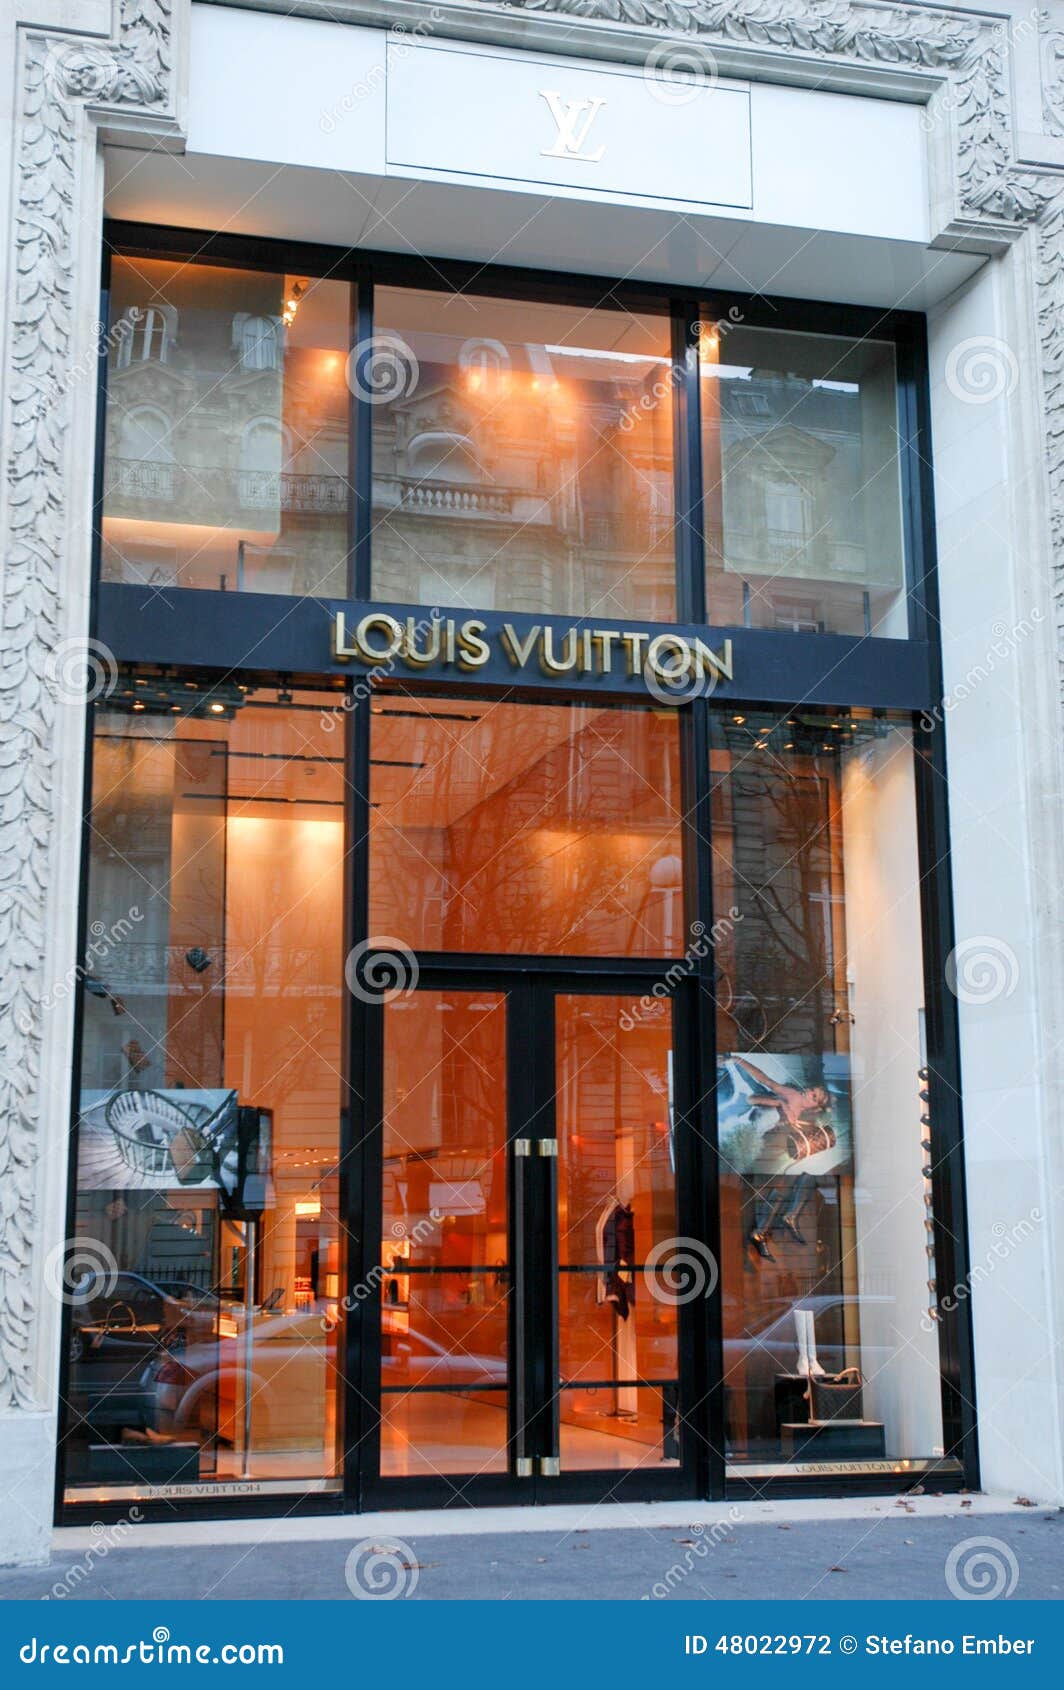 Louis Vuitton&#39;s Clothing Store At Paris On France Editorial Photography - Image: 48022972